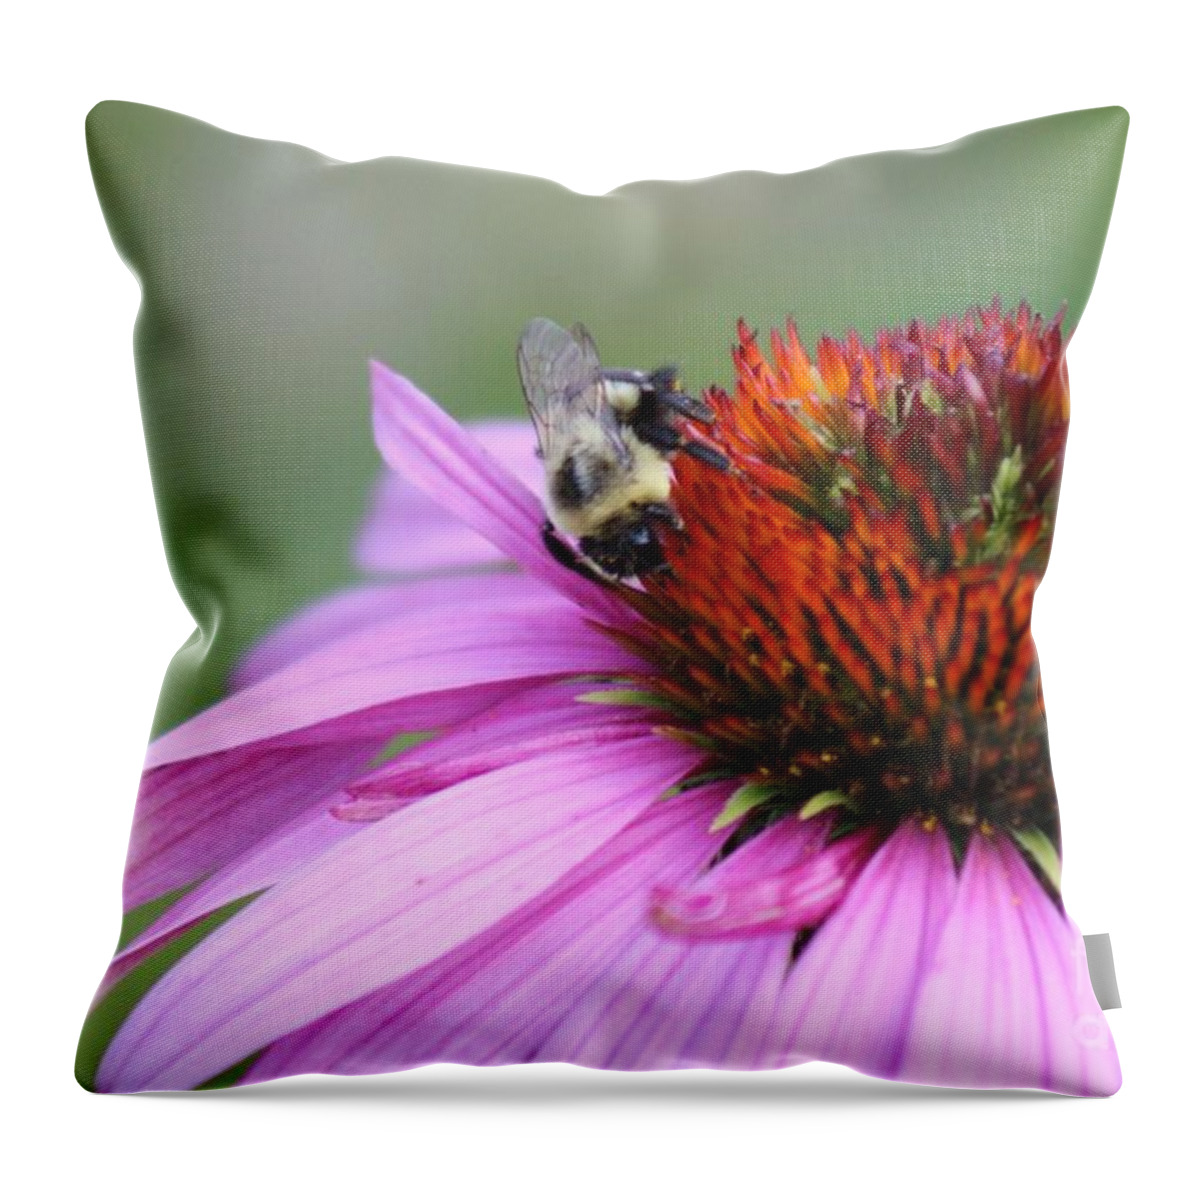 Pink Throw Pillow featuring the photograph Nature's Beauty 77 by Deena Withycombe